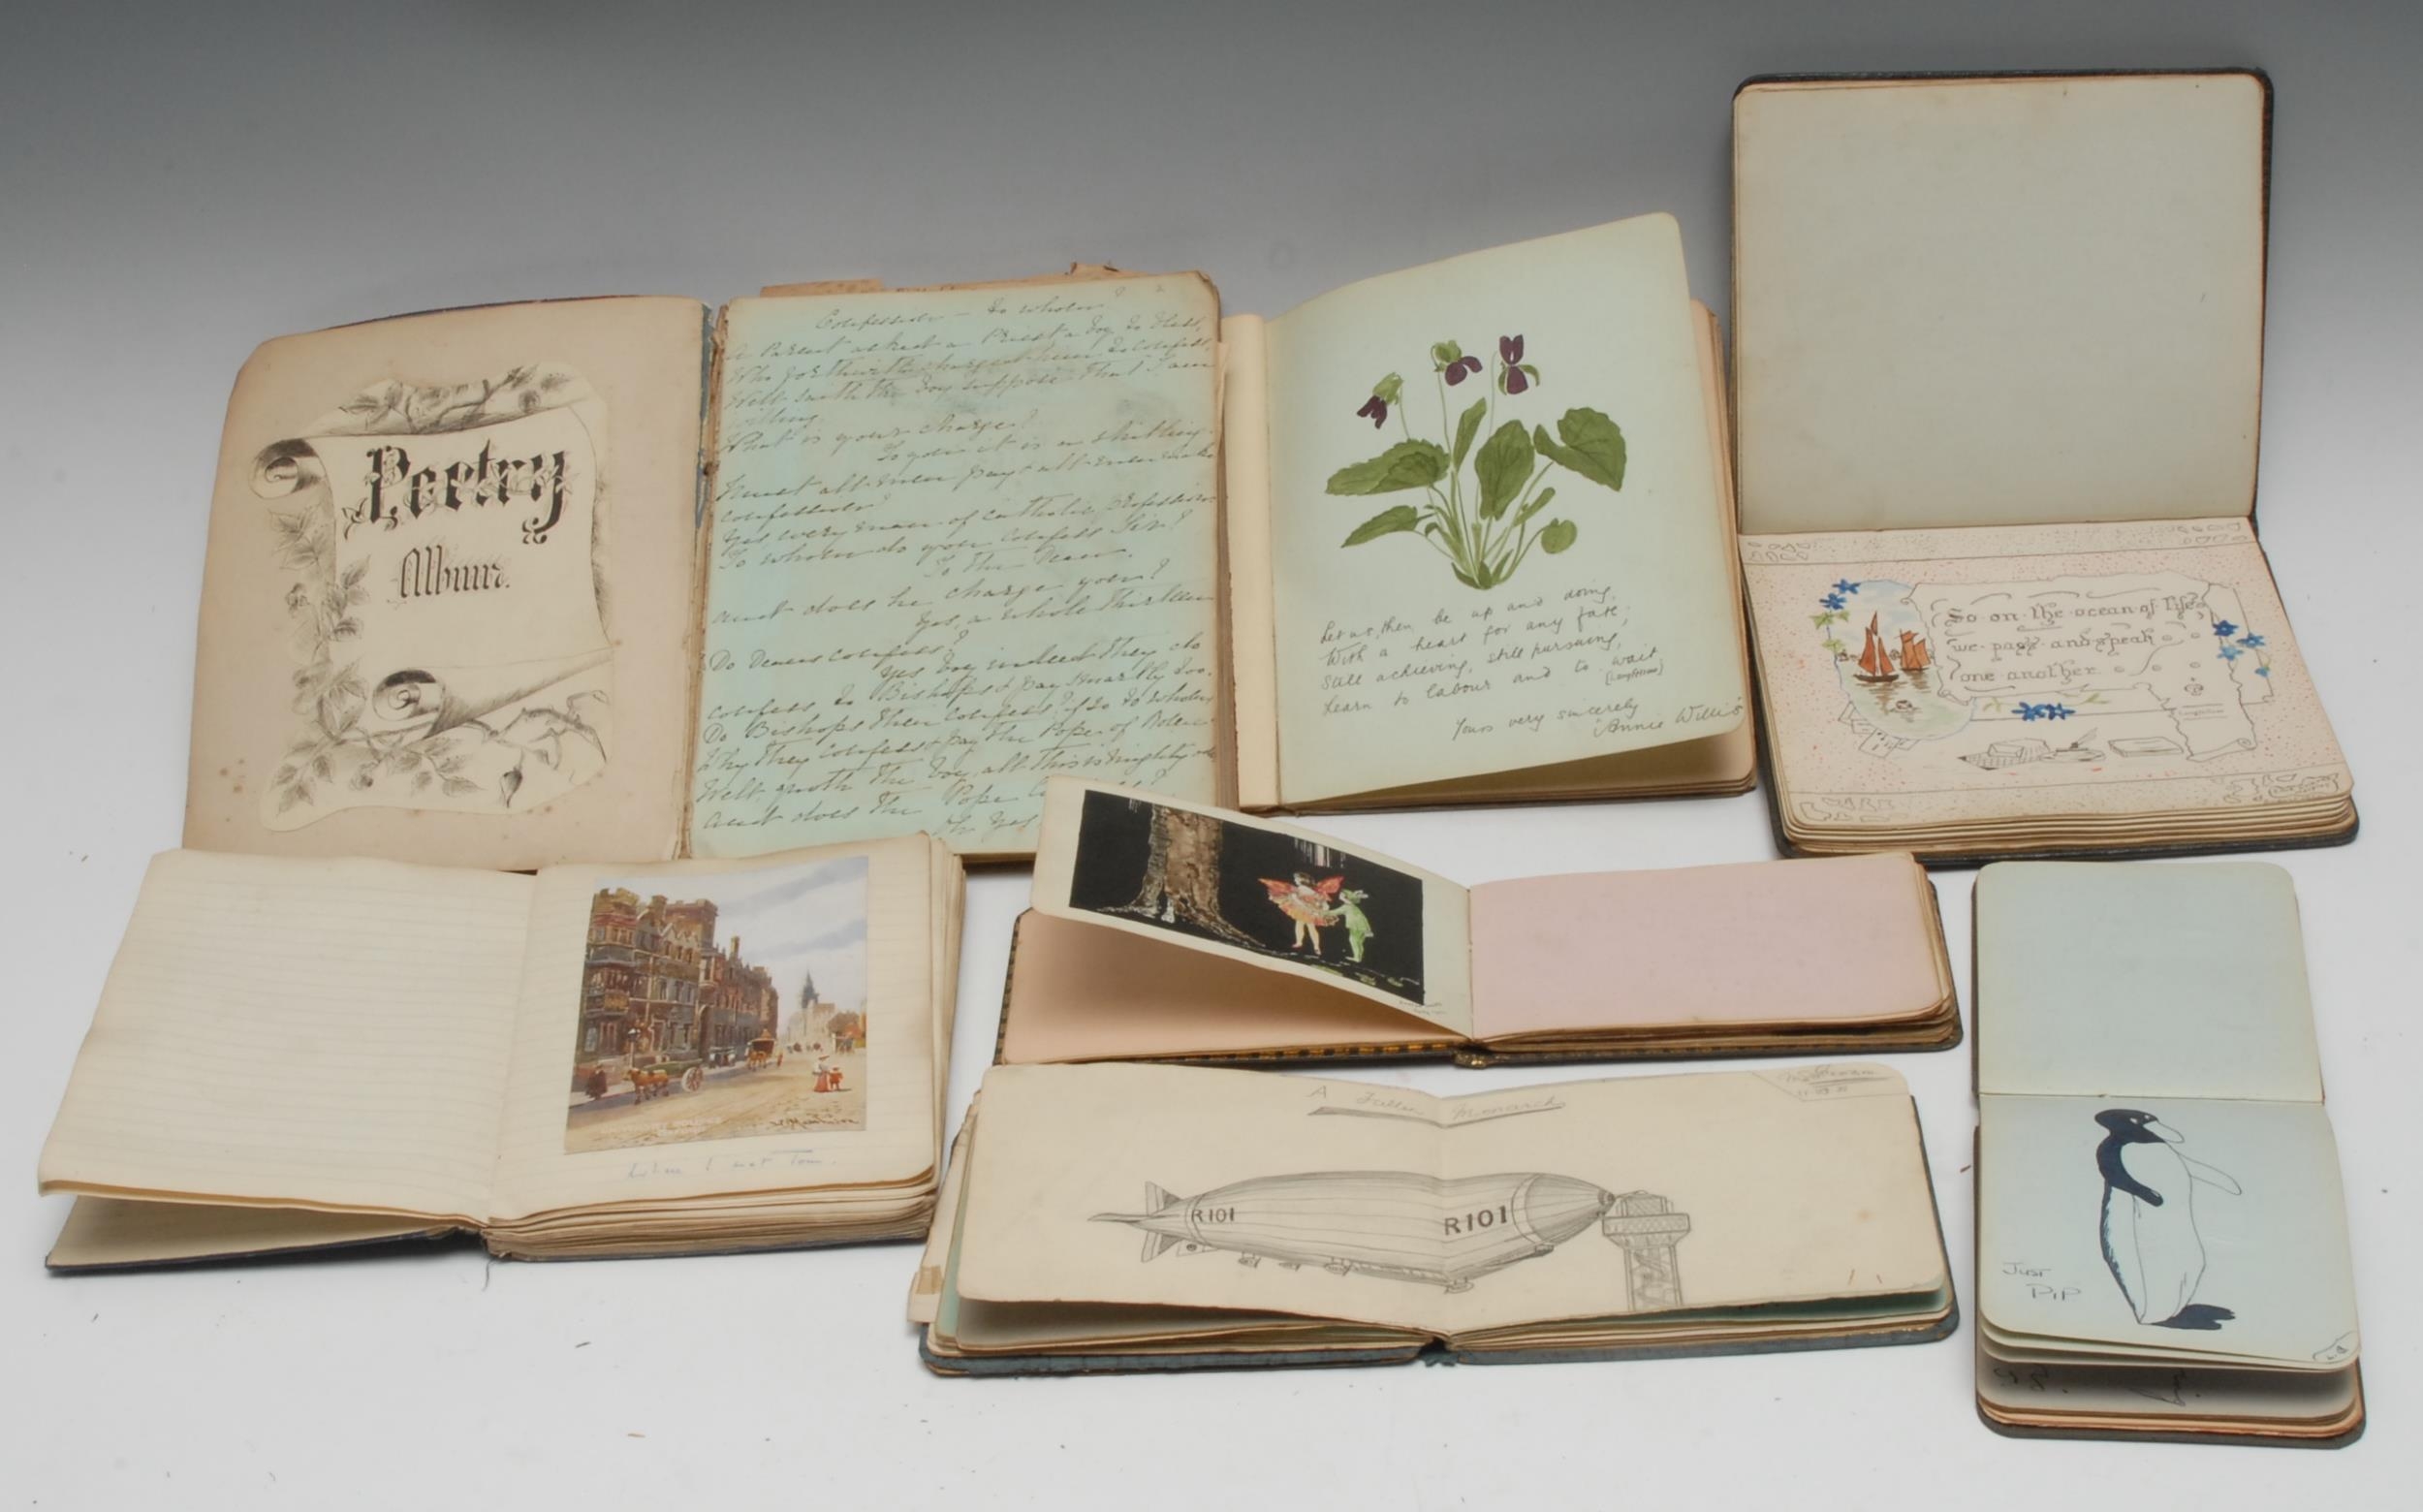 A collection of 6 early-mid 20th century friendship albums, each book inscribed in ink MS with